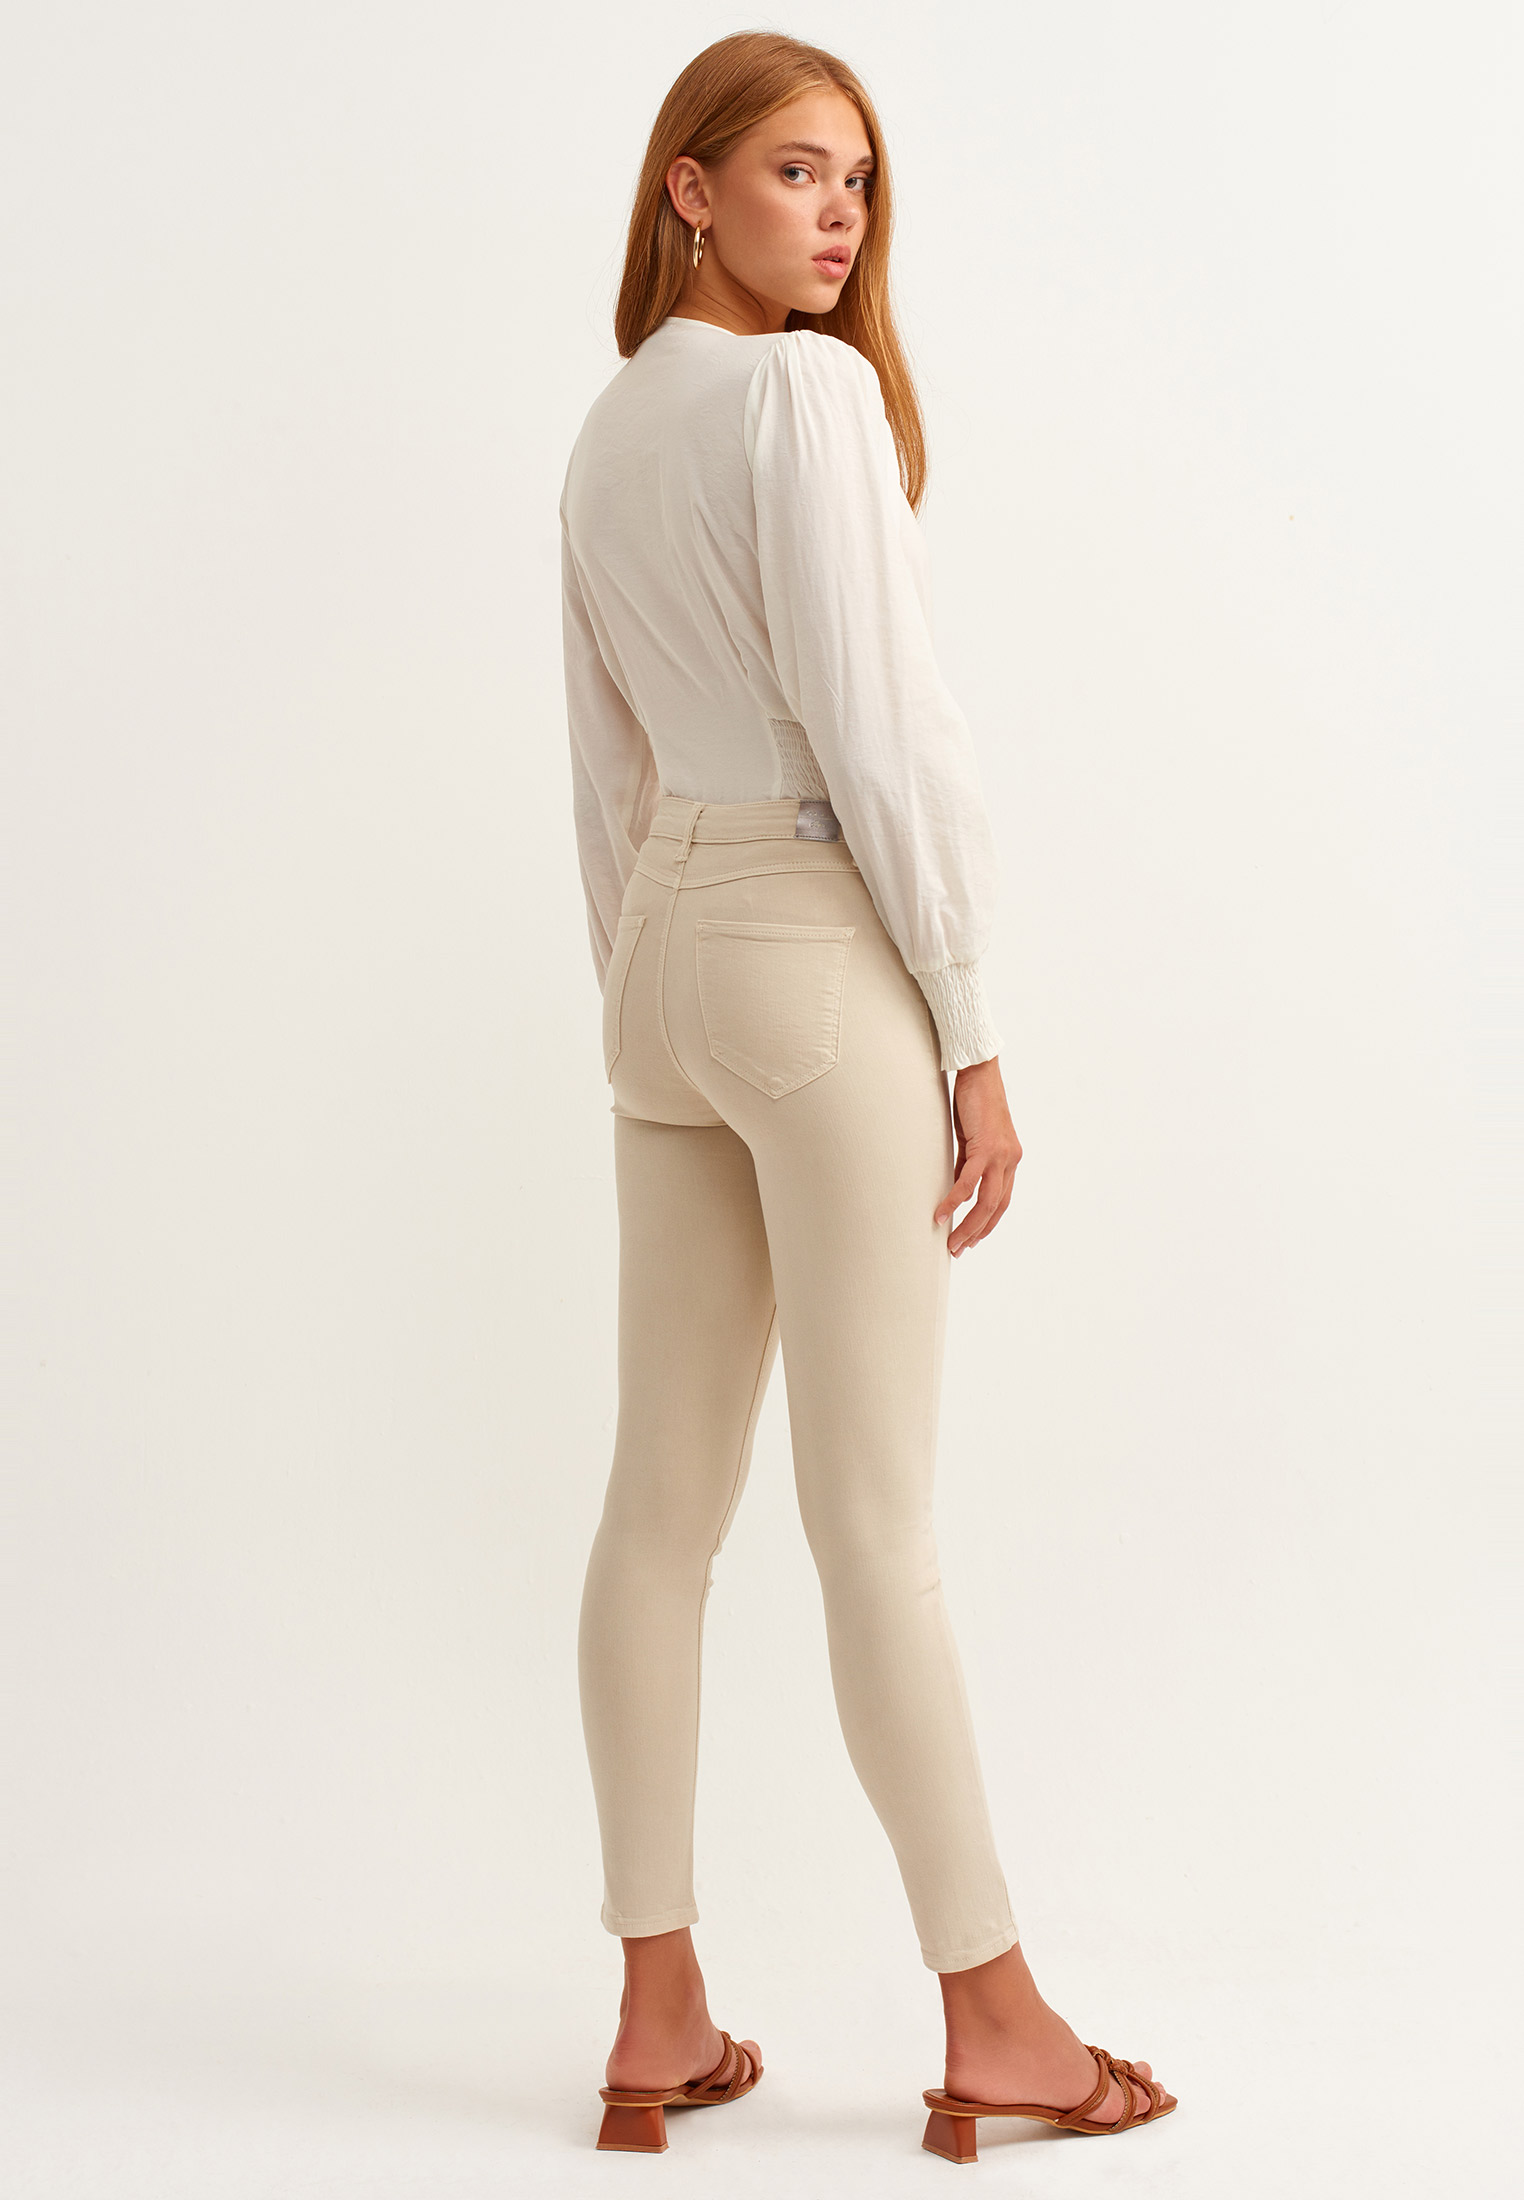 Women Beige Skinny Pants With Recovery Effect